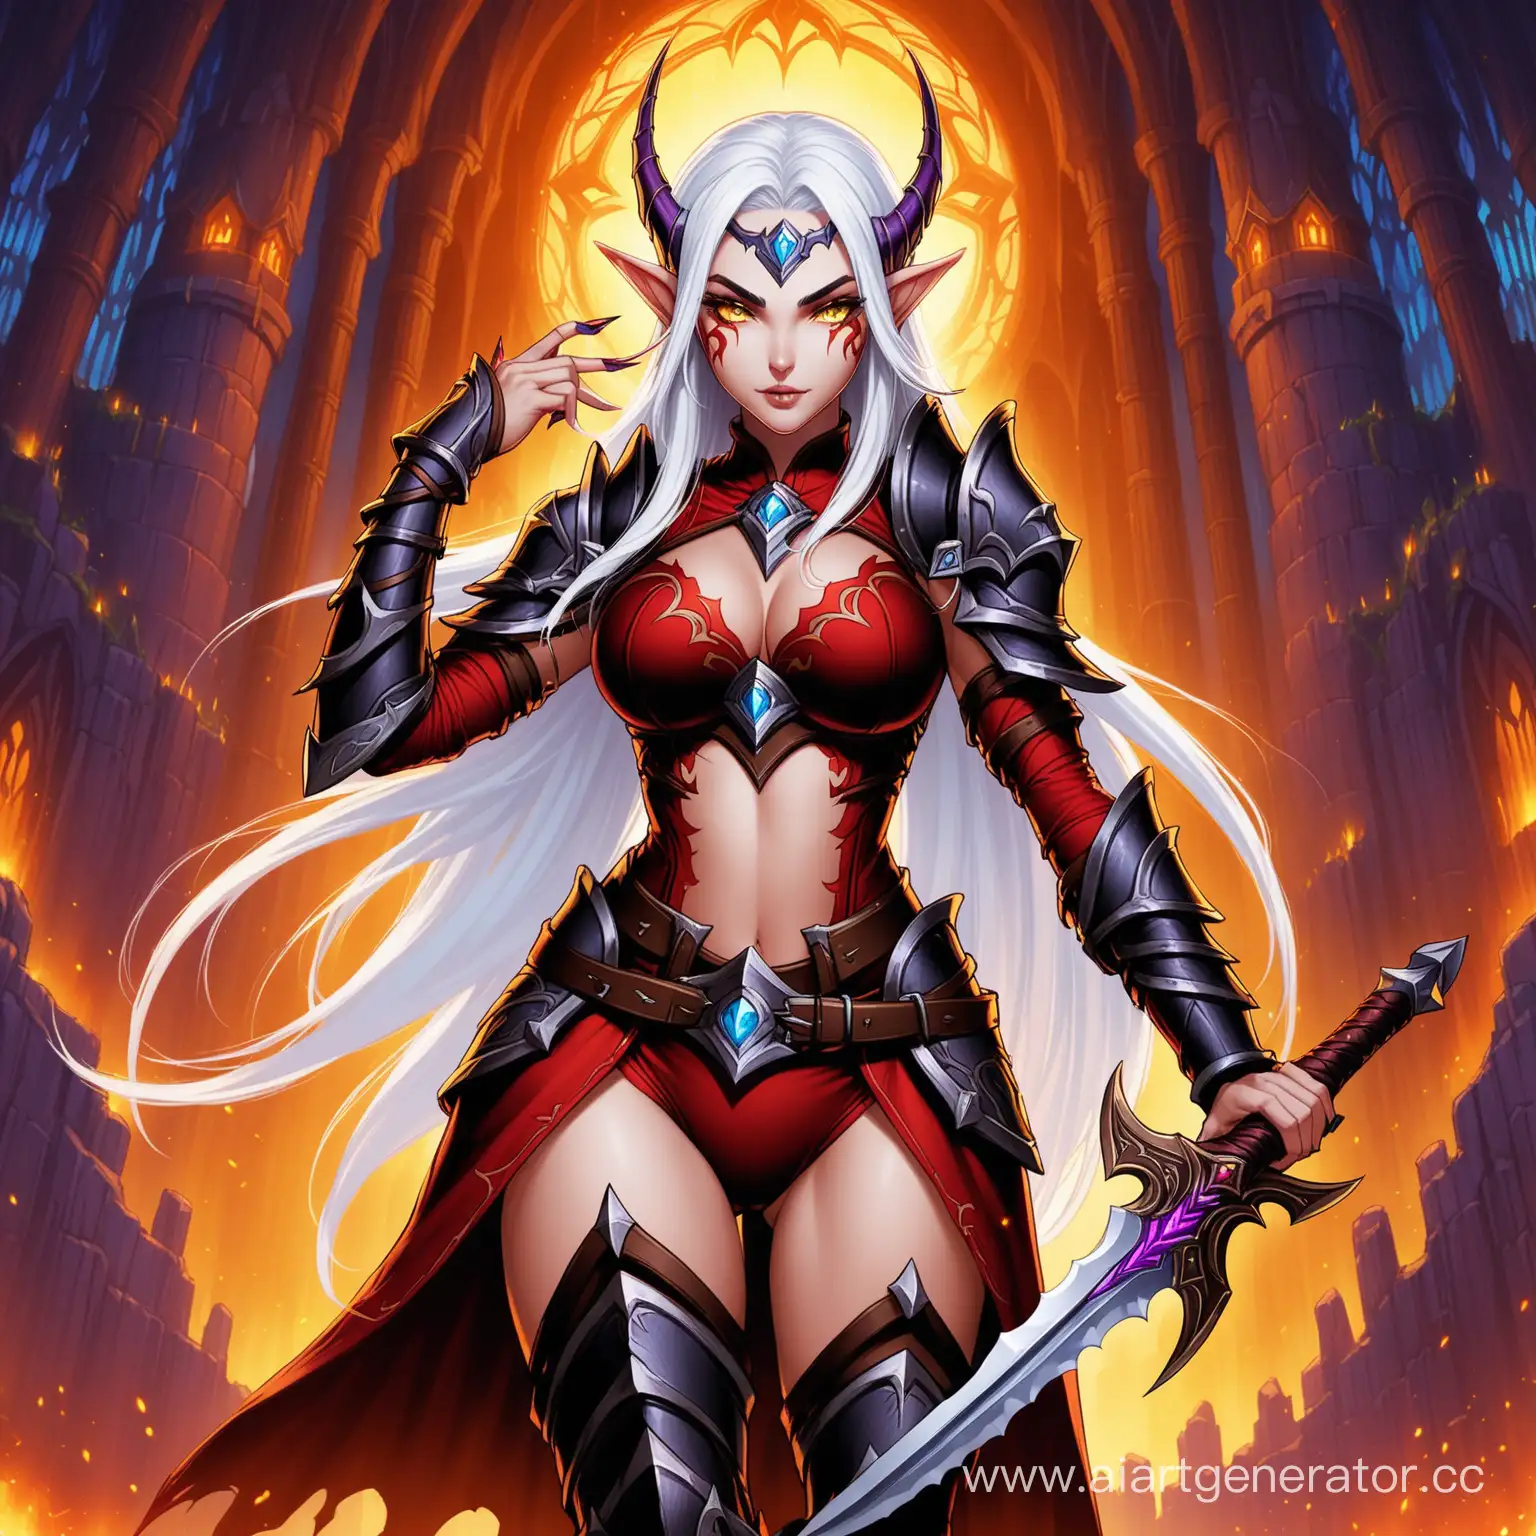 Warcraft night elf woman, long white hair, yellow eyes, red tattoos on her face, dressed as a rogue in dark leather armor with red underwear she's holding a big beautiful dagger in each hand